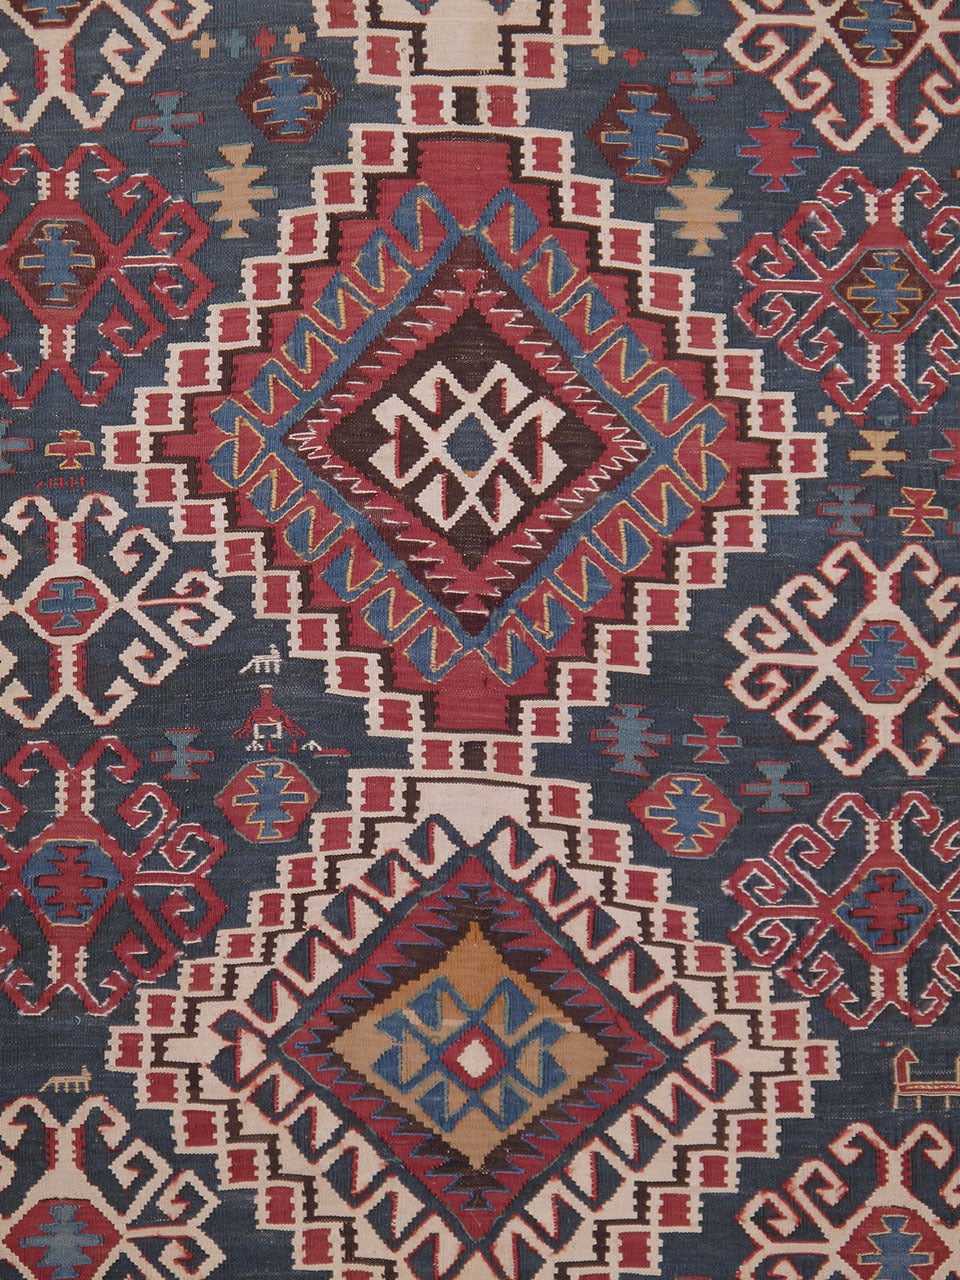 Antique Shirvan Kilim rug. A very handsome antique tribal flat-weave rug from the Caucasus. A great example of a well-known type of rug with a very pleasing color palette. Rug is well proportioned with good width, as most Kilims of this type tend to